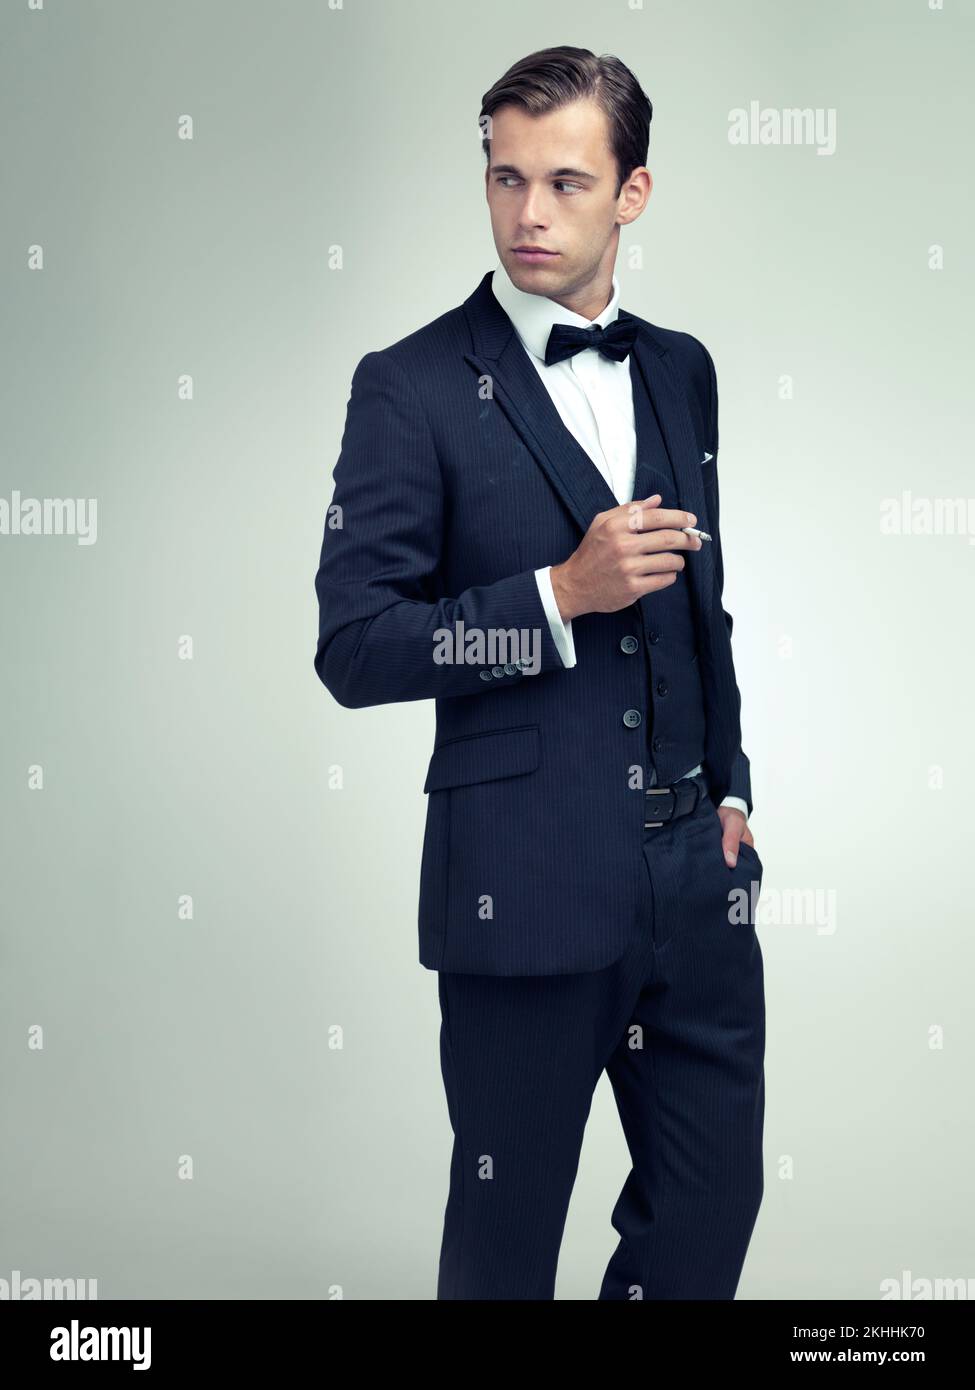 Clothes dont make the man, but they can make the man look great. A studio shot of a dapper young gentleman smoking a cigarette. Stock Photo